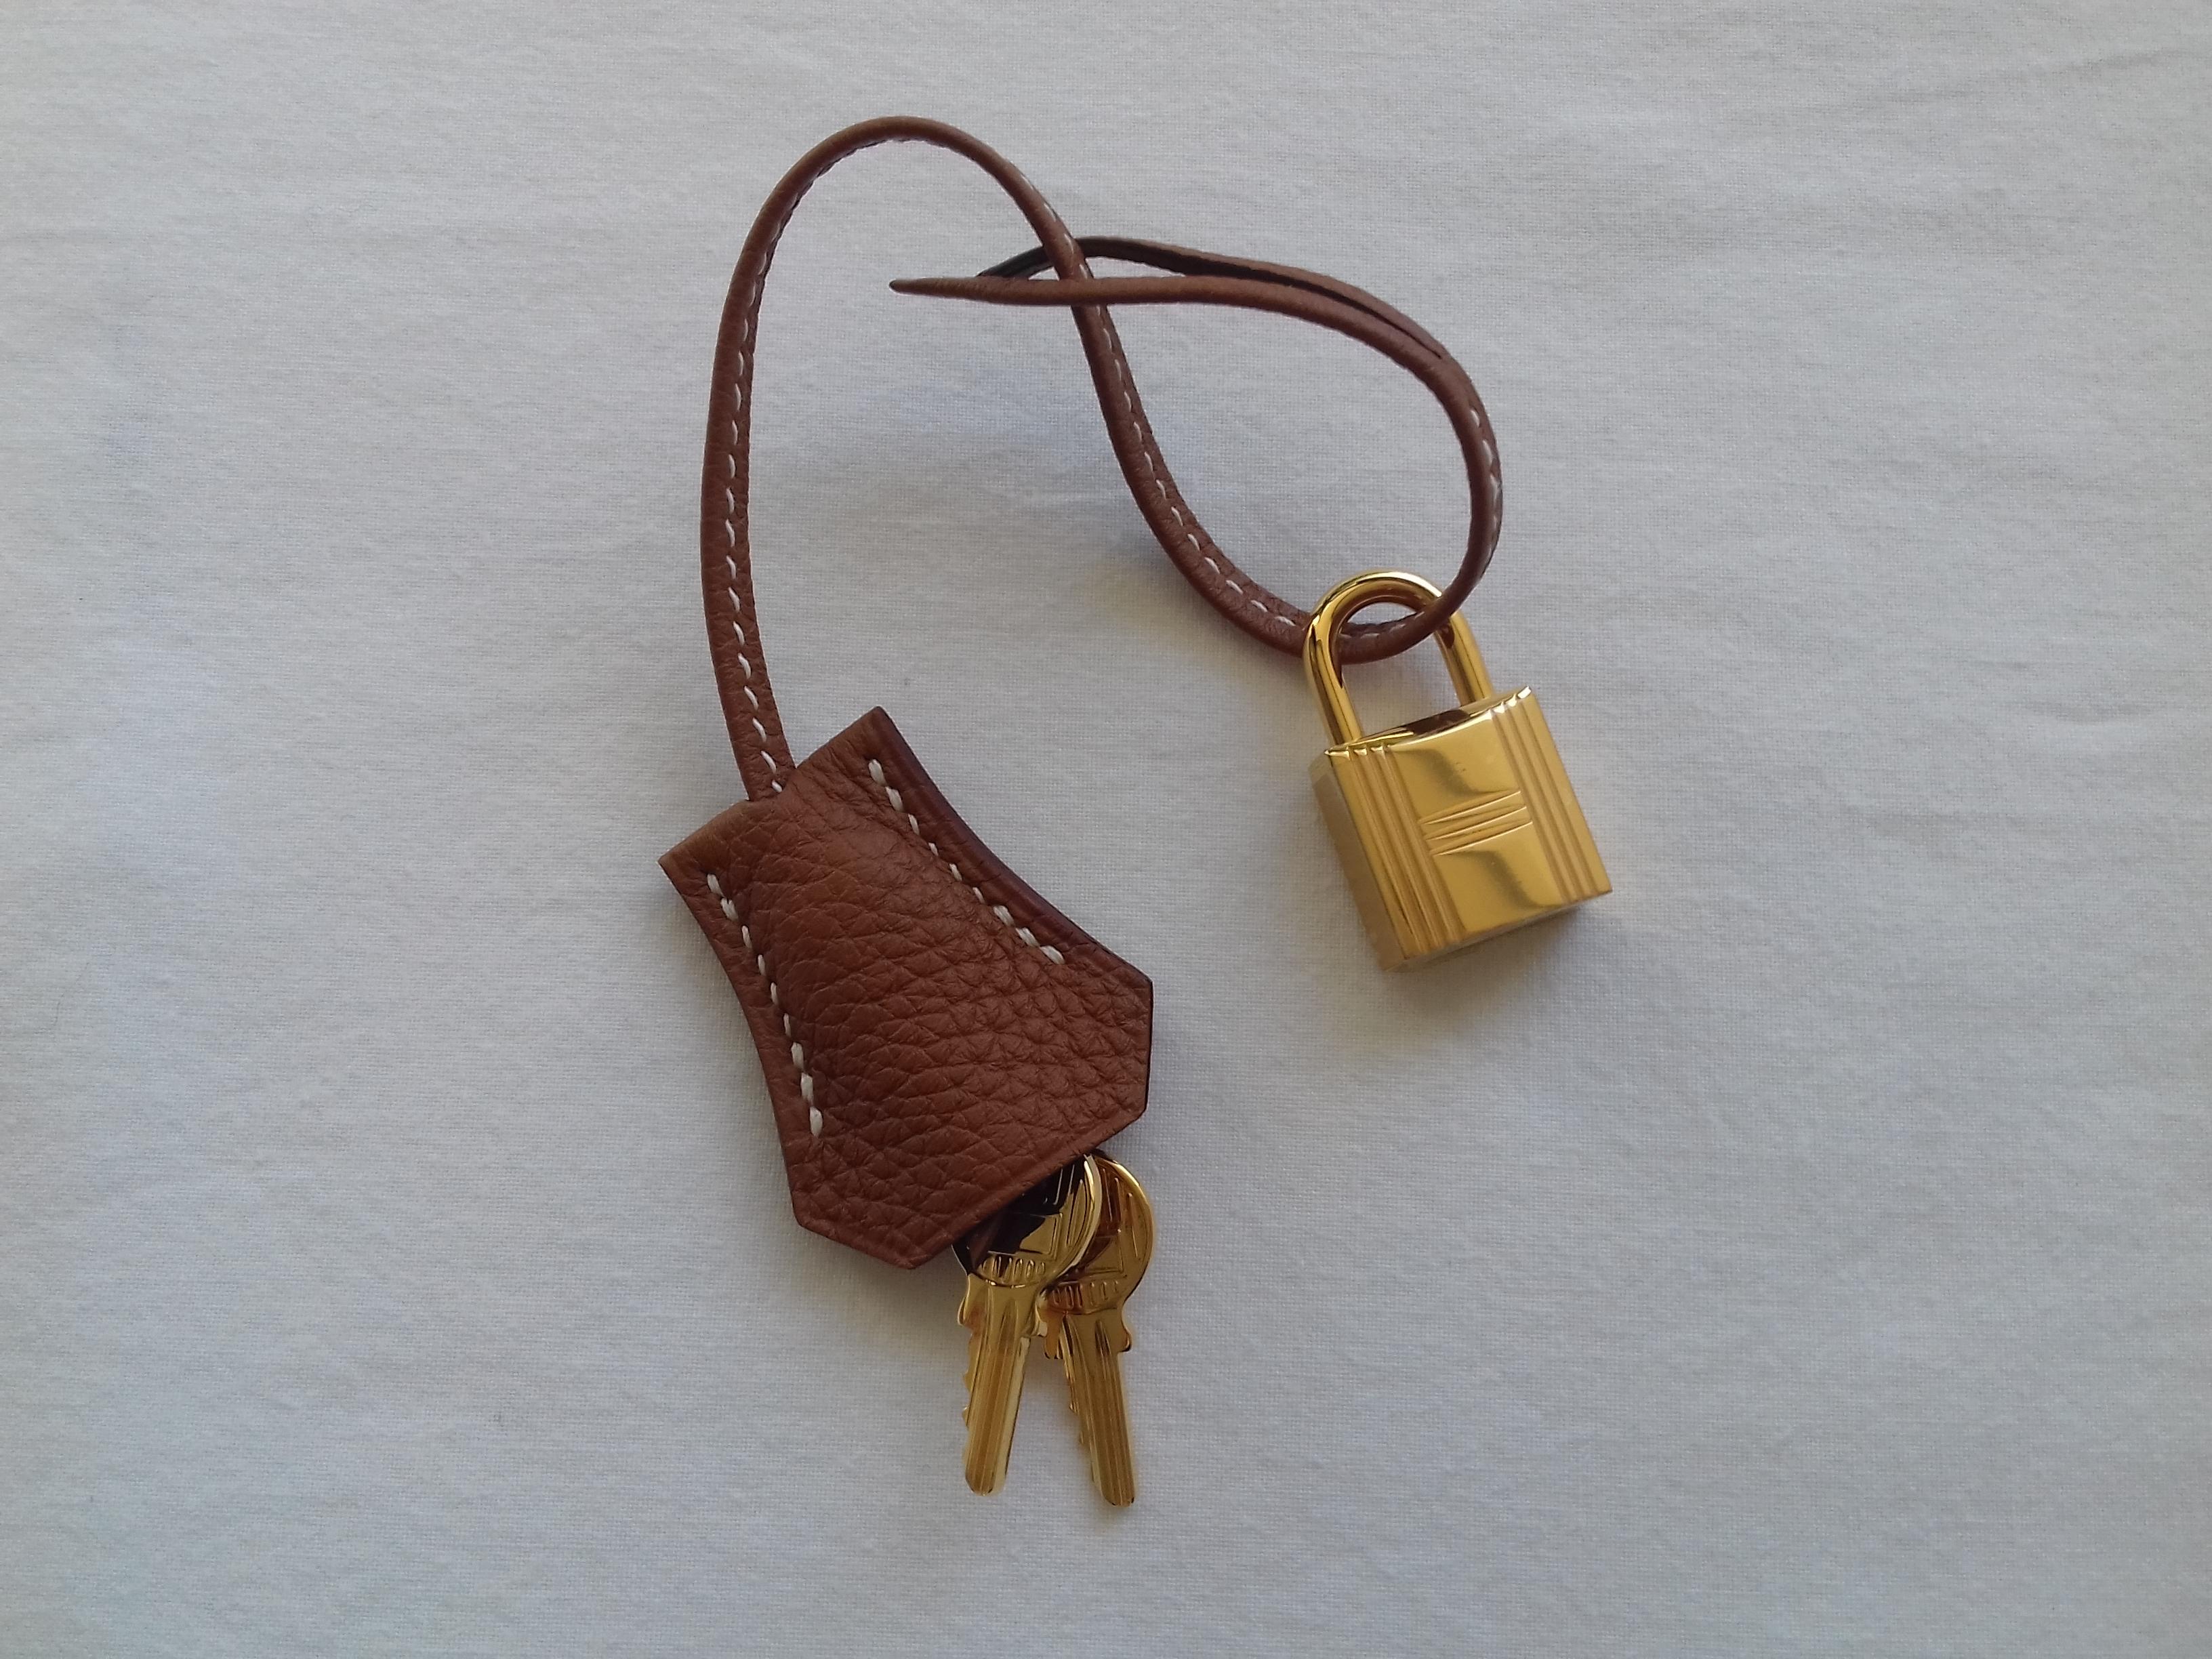 Authentic Hermès Set: Clochette, Tirette, Padlock, 2 keys

Made in France

Made of Taurillon Clemence Leather

Colorway: 